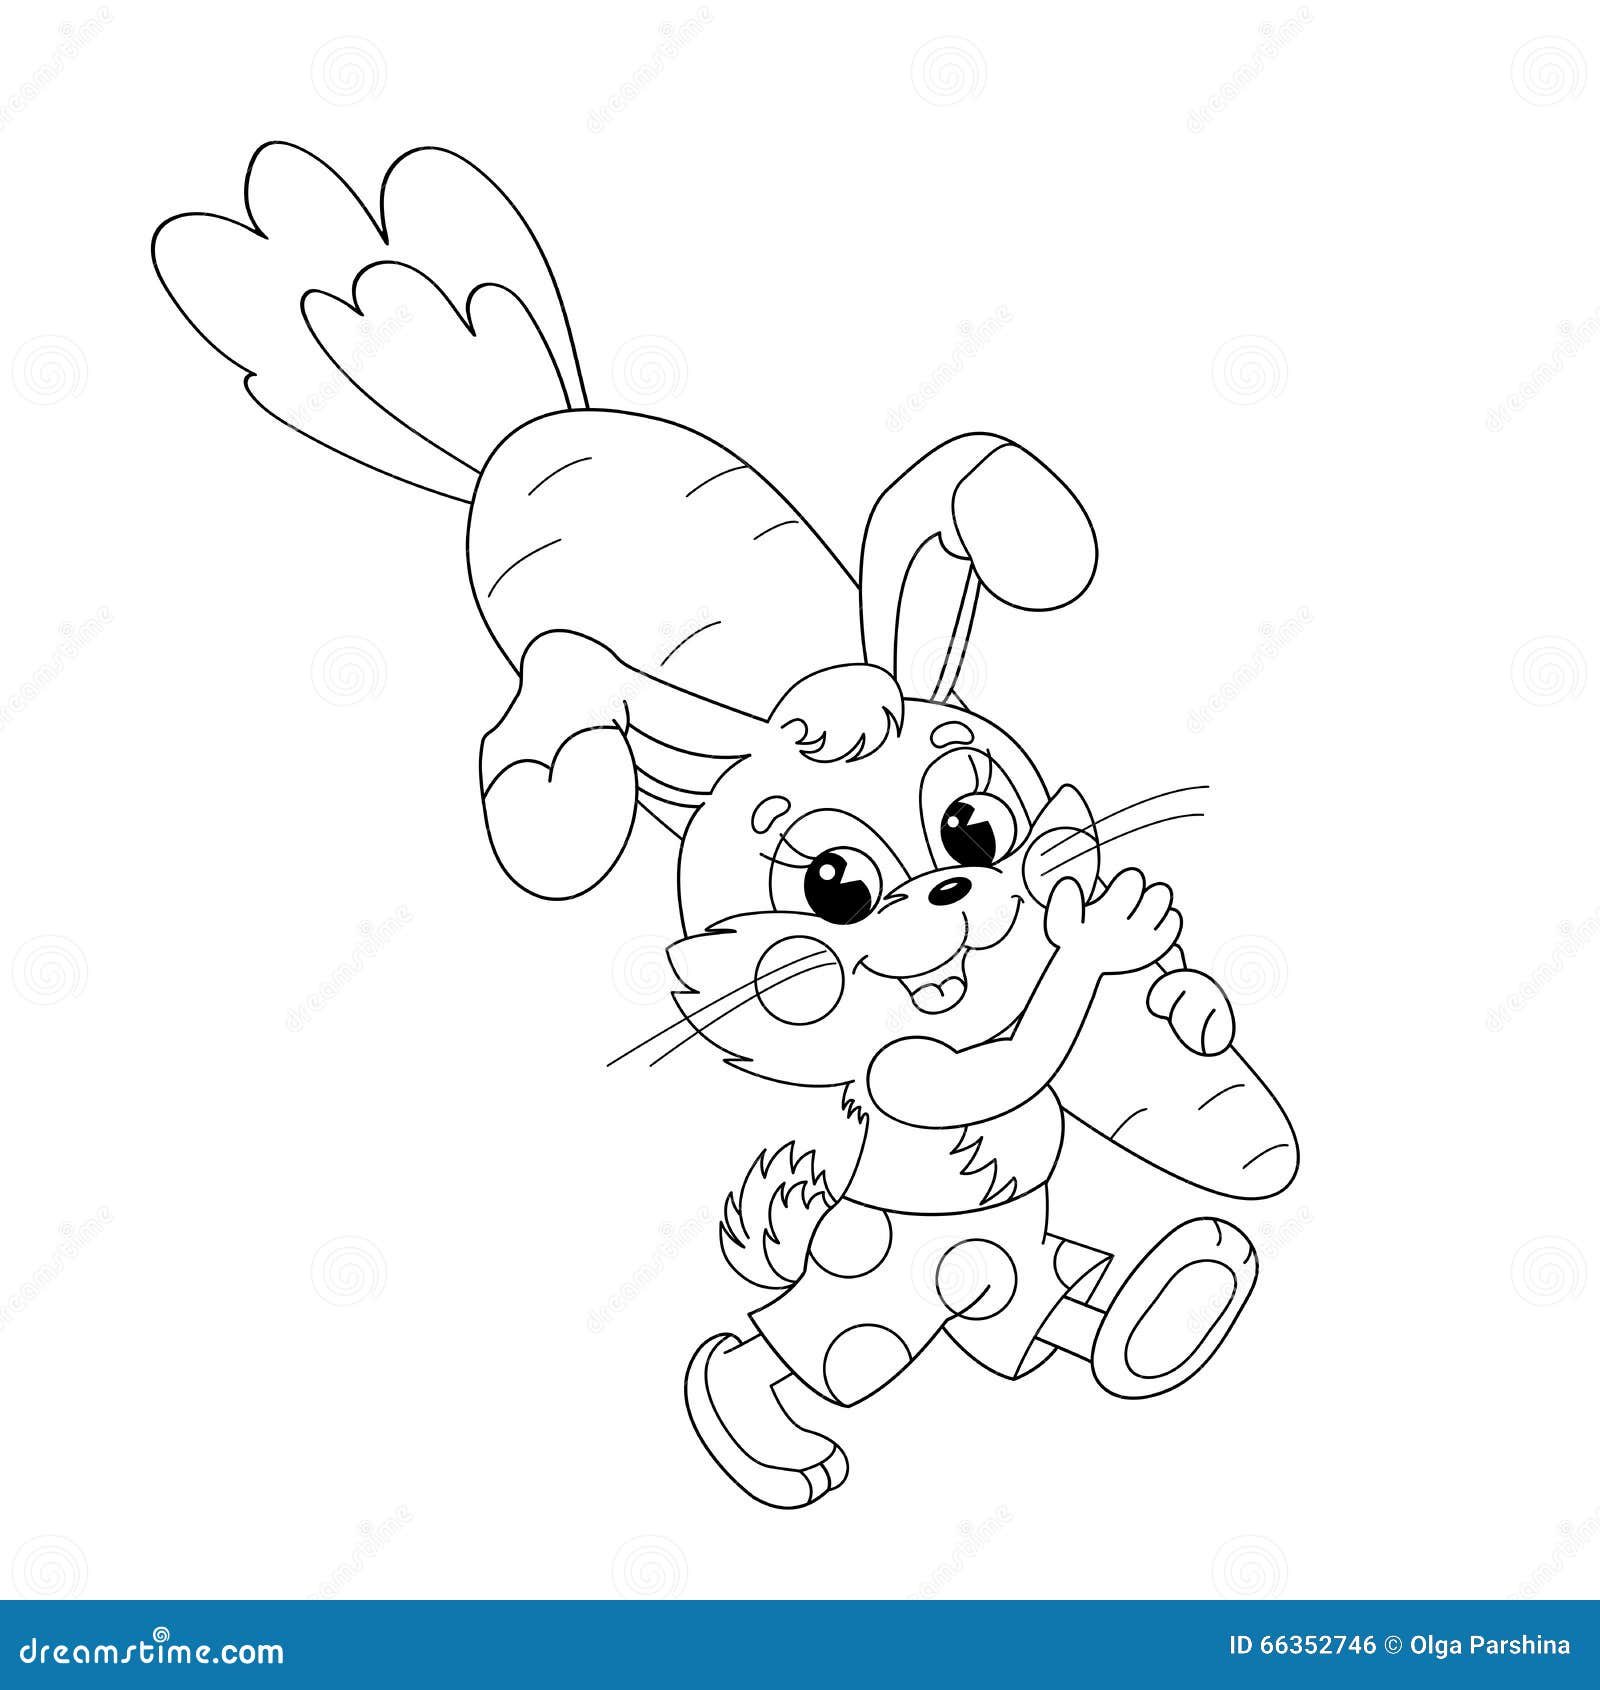 Coloring Page Outline Of Funny Bunny Carrying Big Carrot Stock